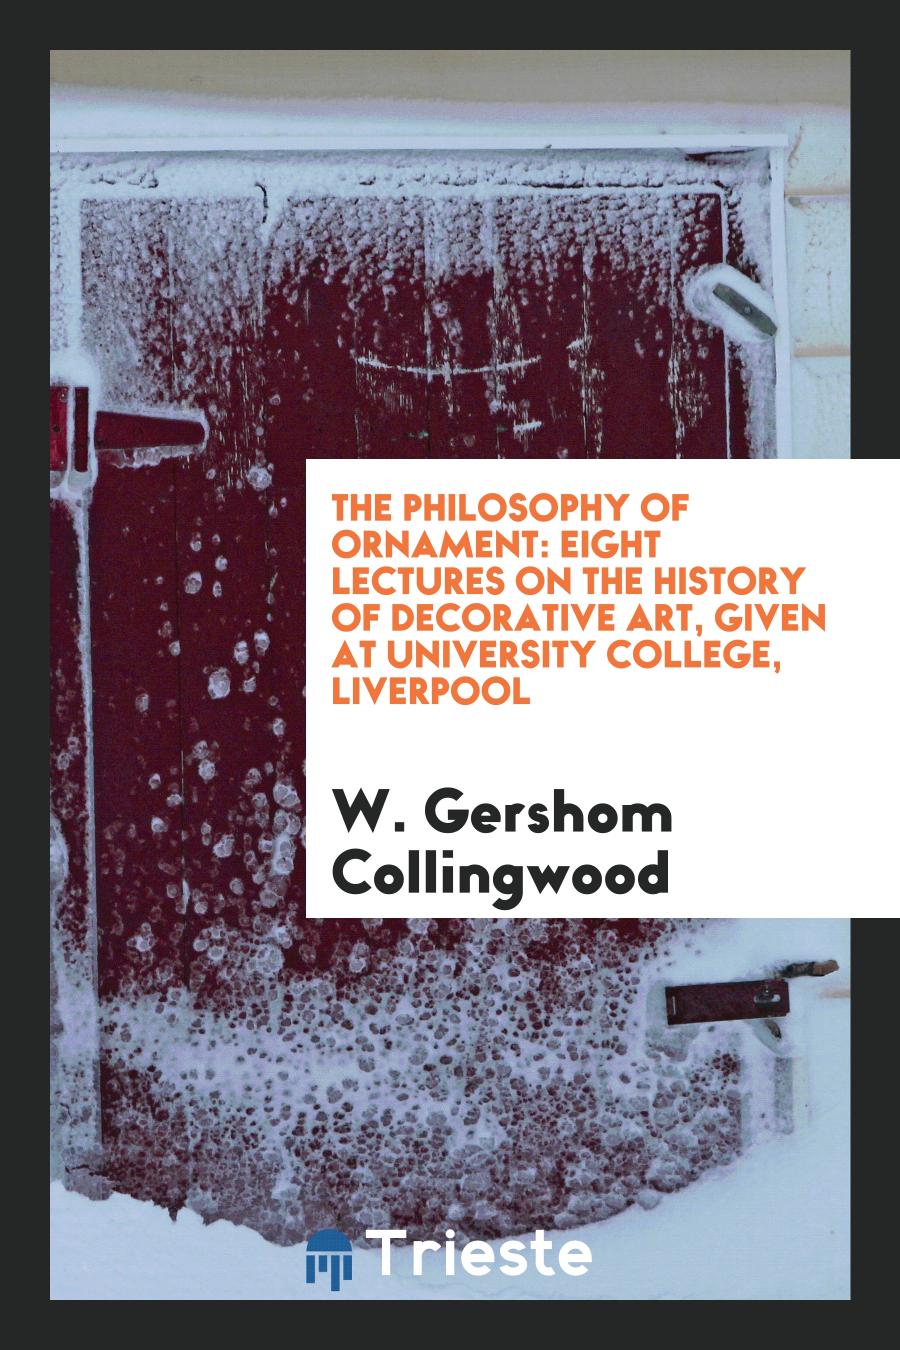 The Philosophy of Ornament: Eight Lectures on the History of Decorative Art, Given at University College, Liverpool